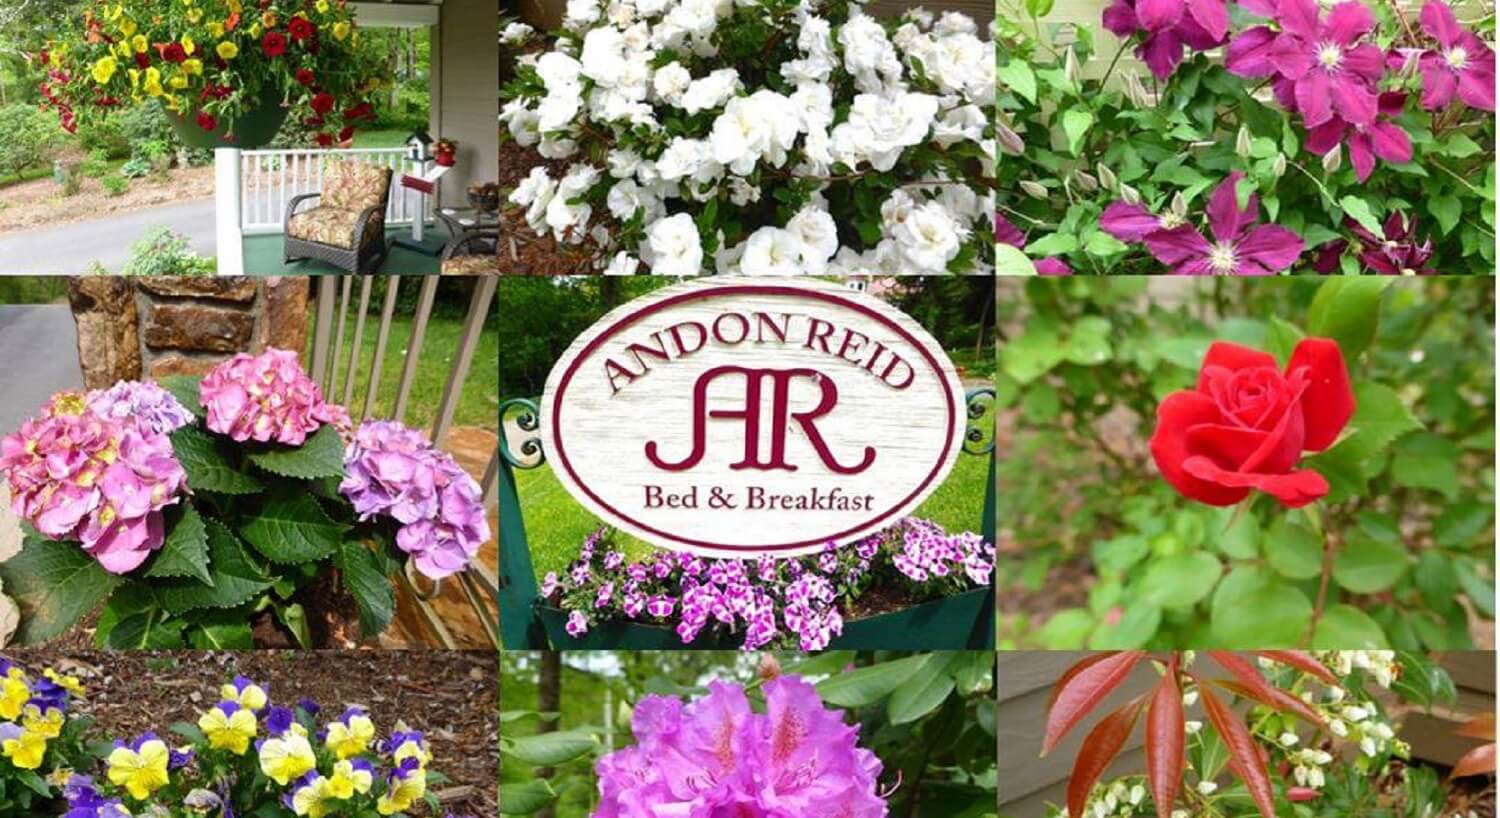 A collage of photos showing various types and colors of flowers with the center image being an oval sign for a bed and breakfast